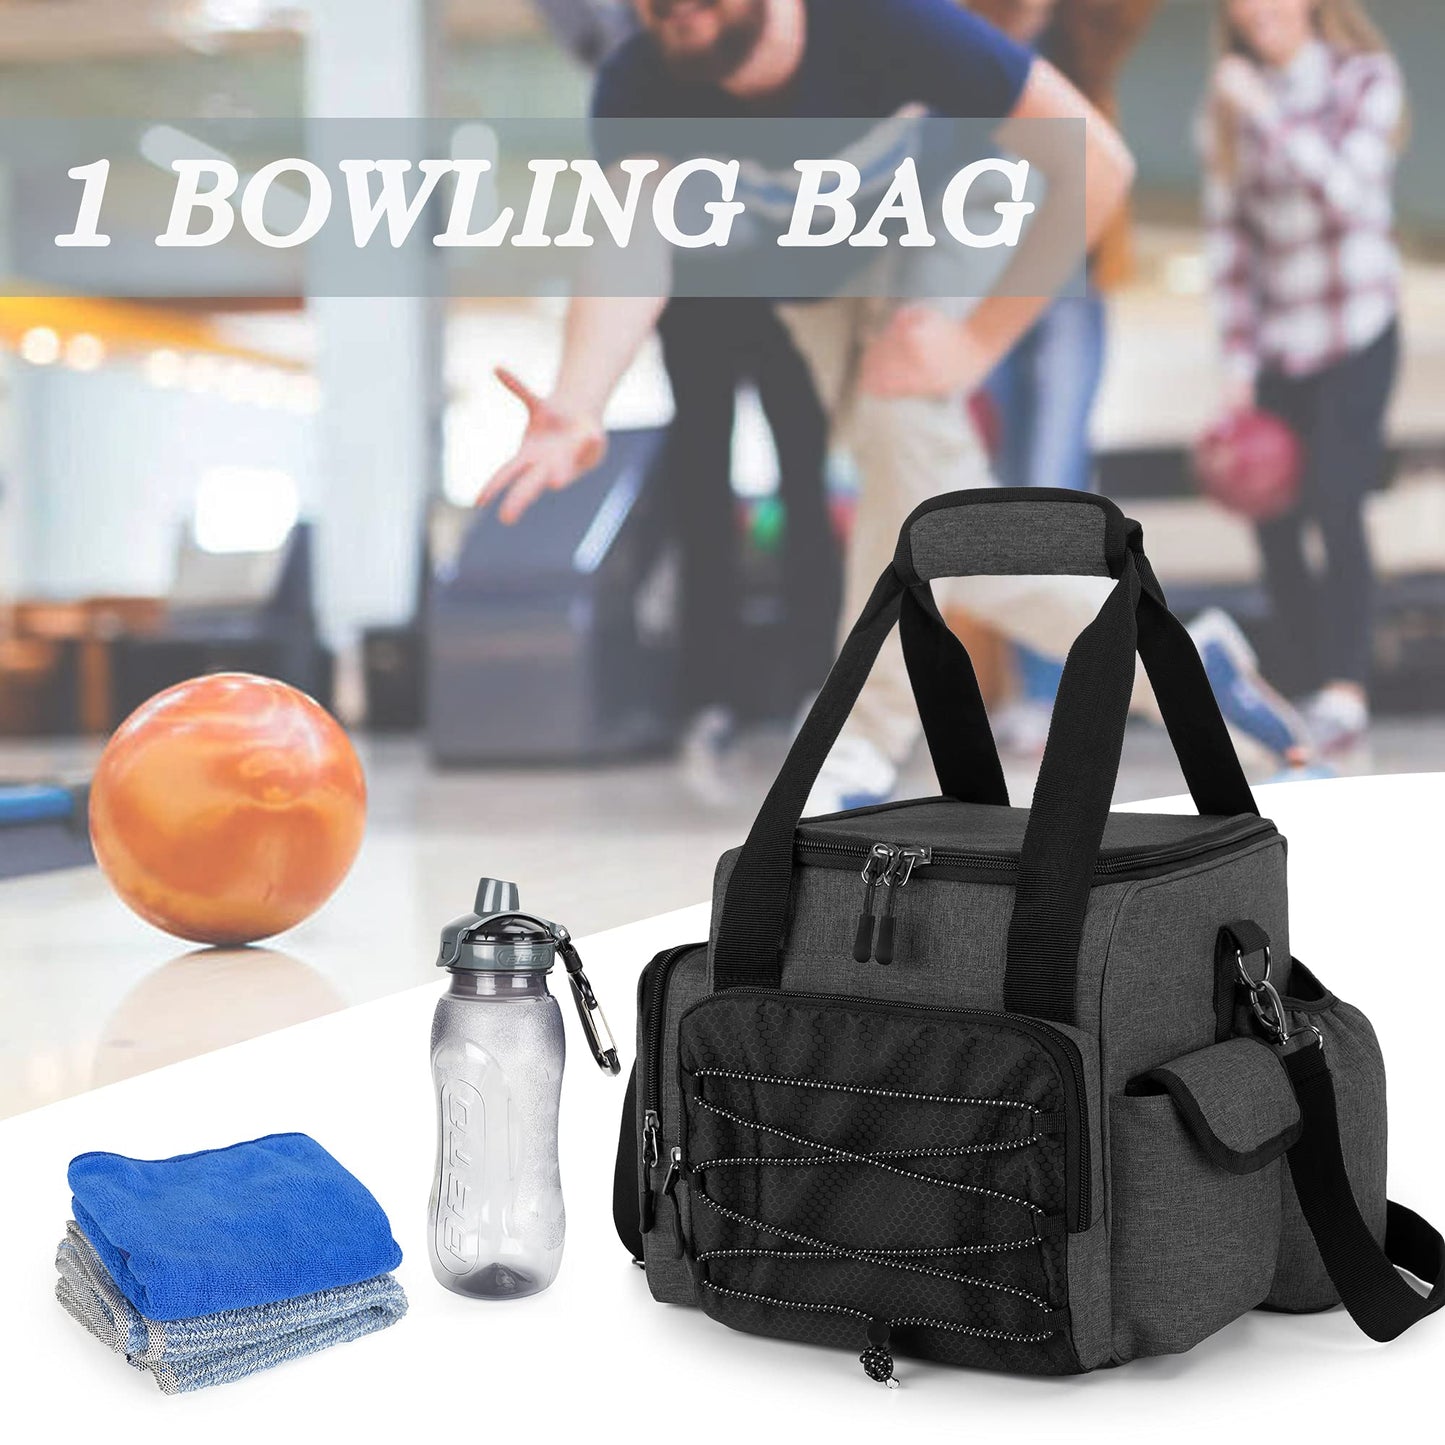 DSLEAF Bowling Ball Bag for Single Ball, Bowling Ball Tote Bag with Wooden Ball Holder and Extra Storage Pockets